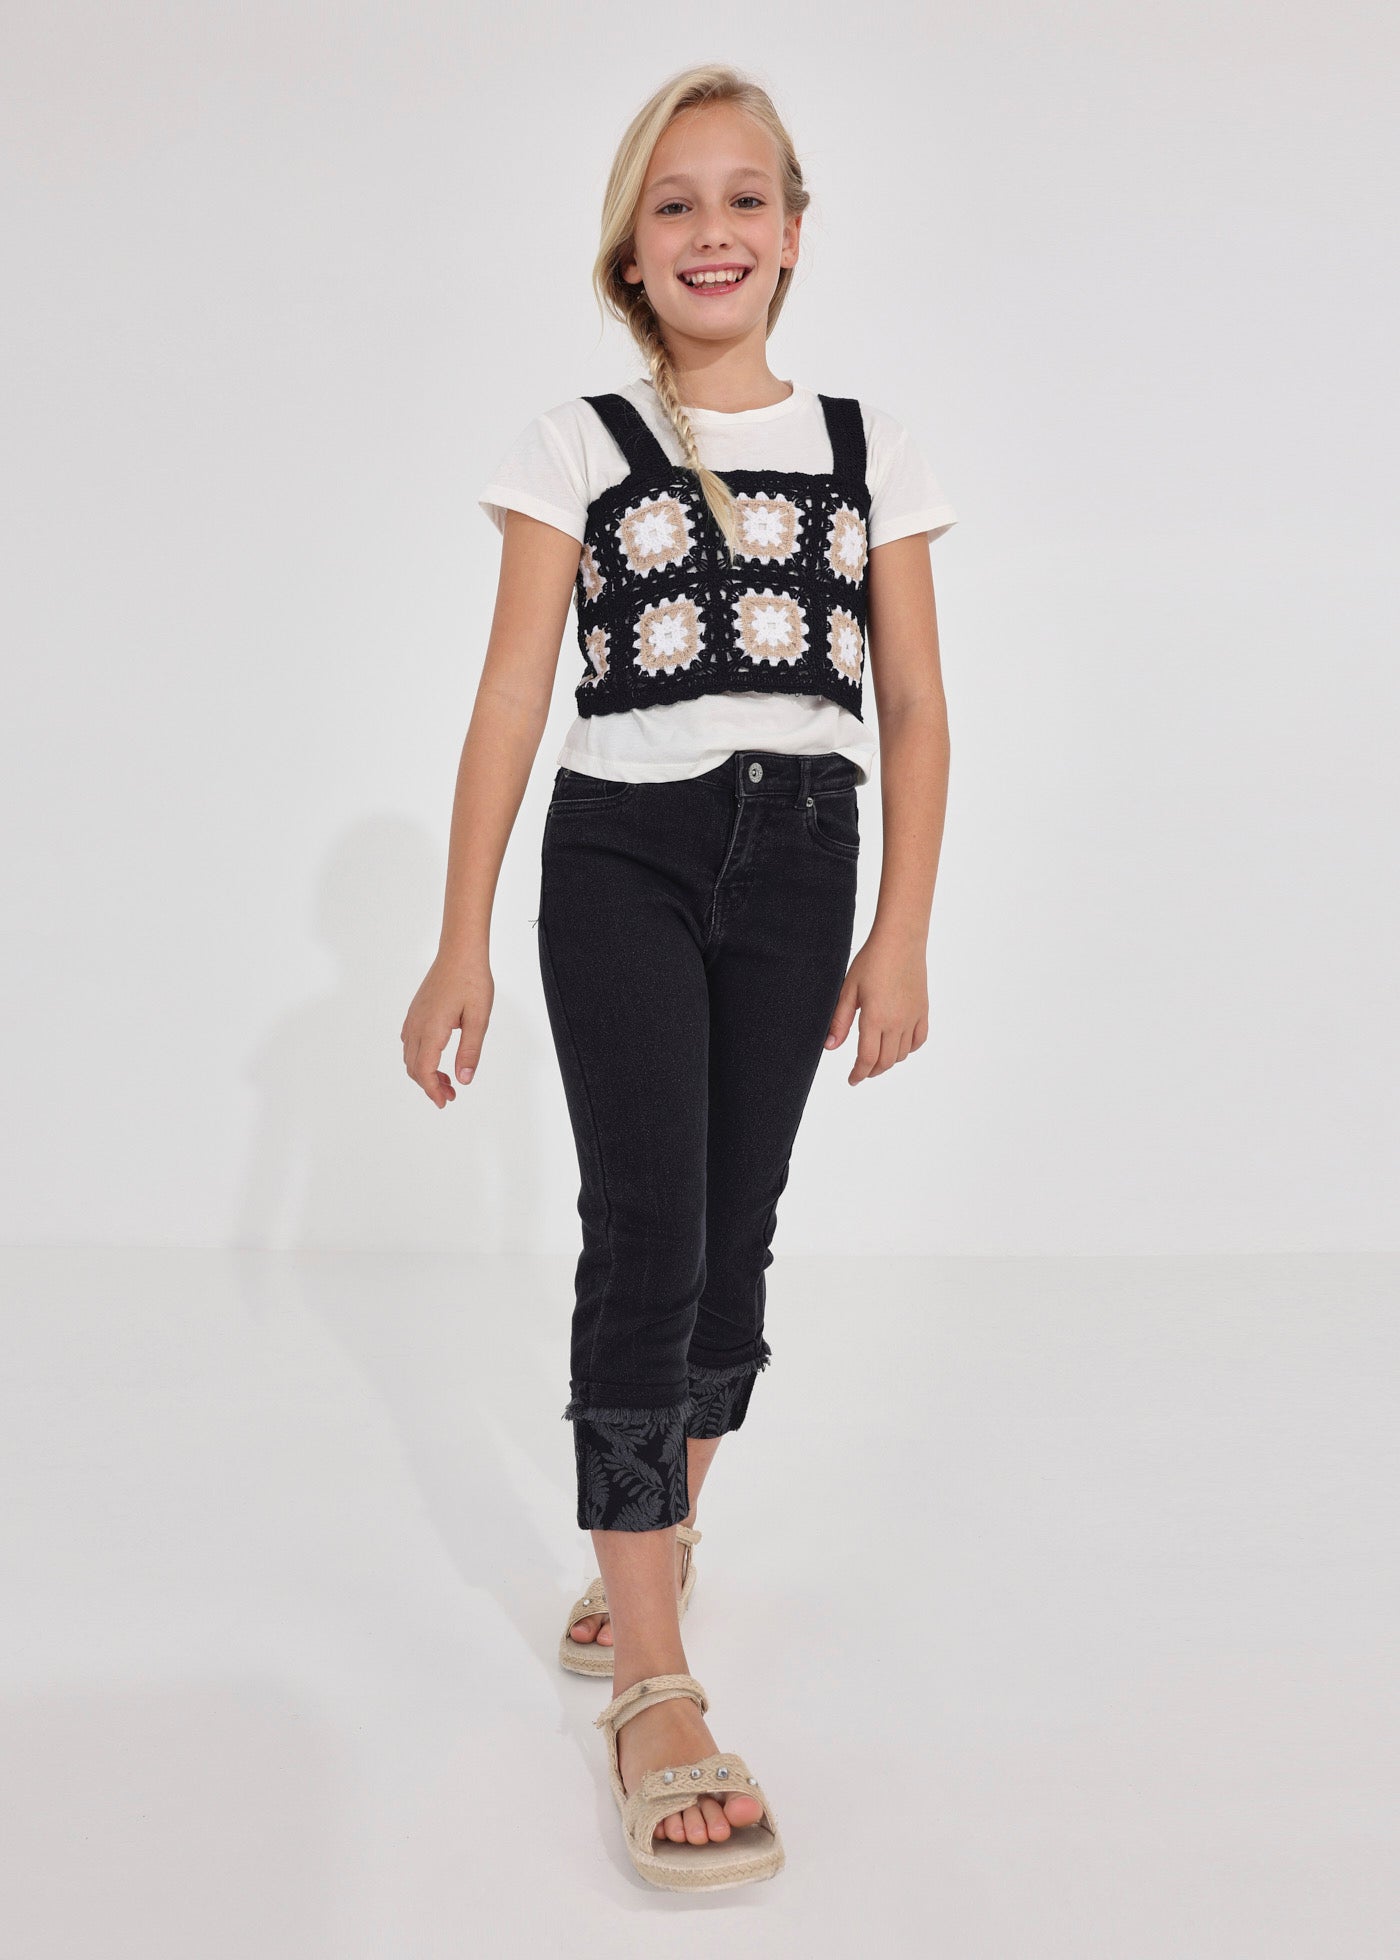 Mayoral Junior Cropped T-Shirt w/Granny Square Overlay _Off White 6066-070